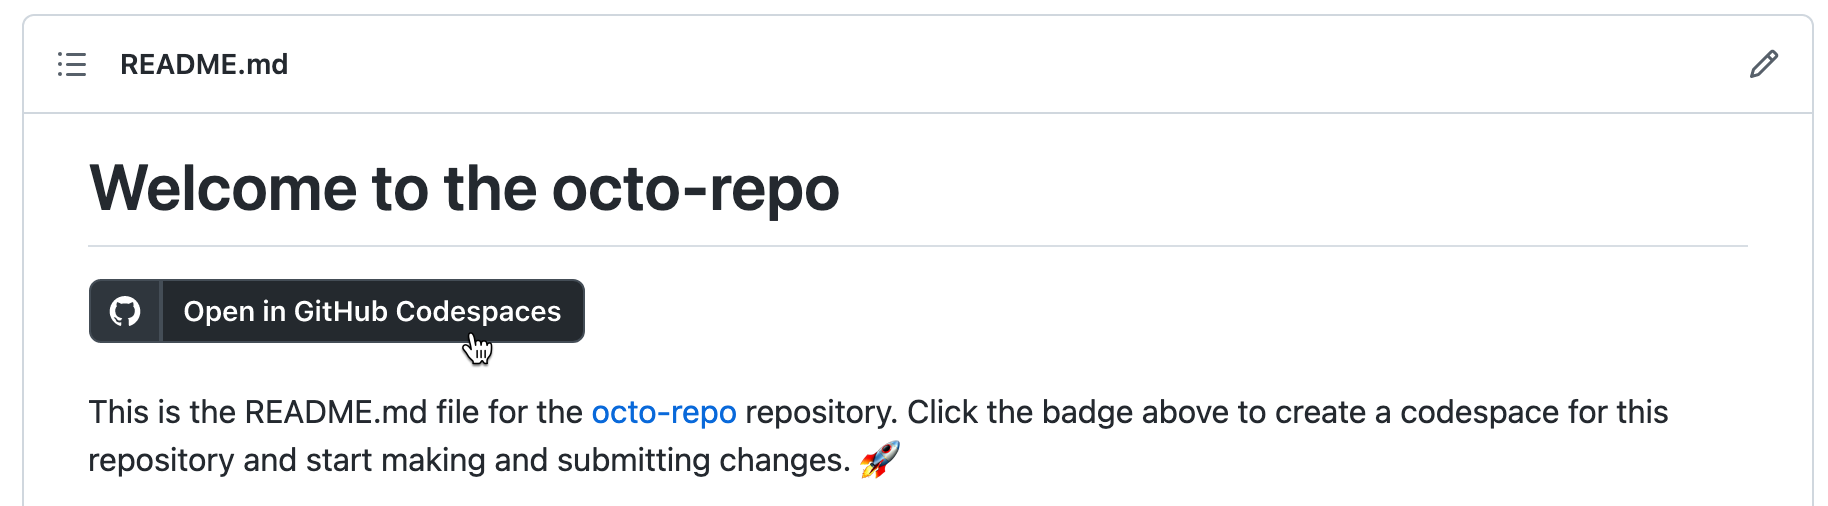 Screenshot of an "Open in GitHub Codespaces" badge on a README page.